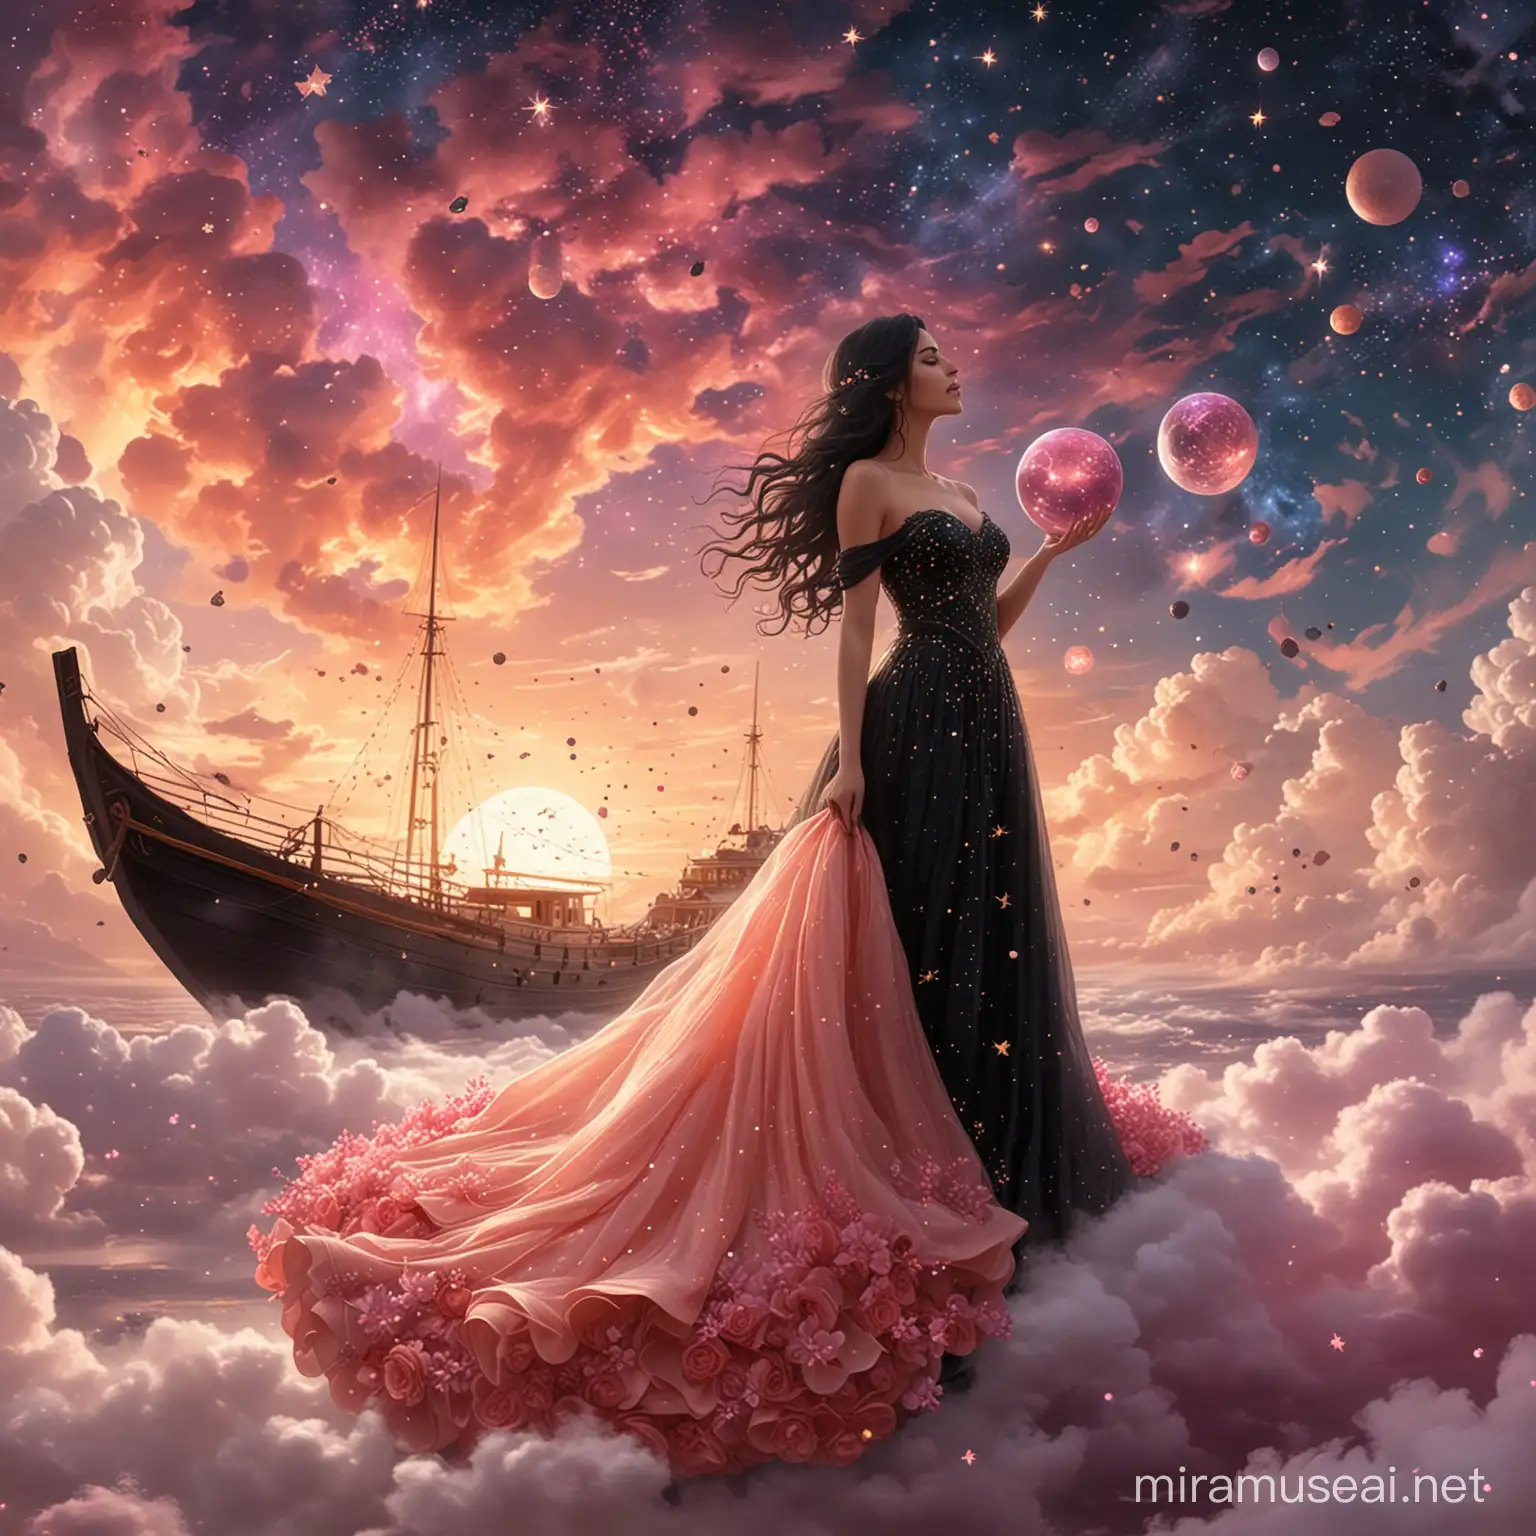 A beautiful woman, standing up on a cloud, collecting stars, surrounded by small dark pink and beige flowers. Long wavy black hair. Elegant long salmon and black wedding dress, haute couture. Background nebula sky with golden light. Background constellation map. Background a beautiful boat. Background a big transparent ball. 8k, fantasy, illustration, digital art, illustration art, fantasy art, fantasy style